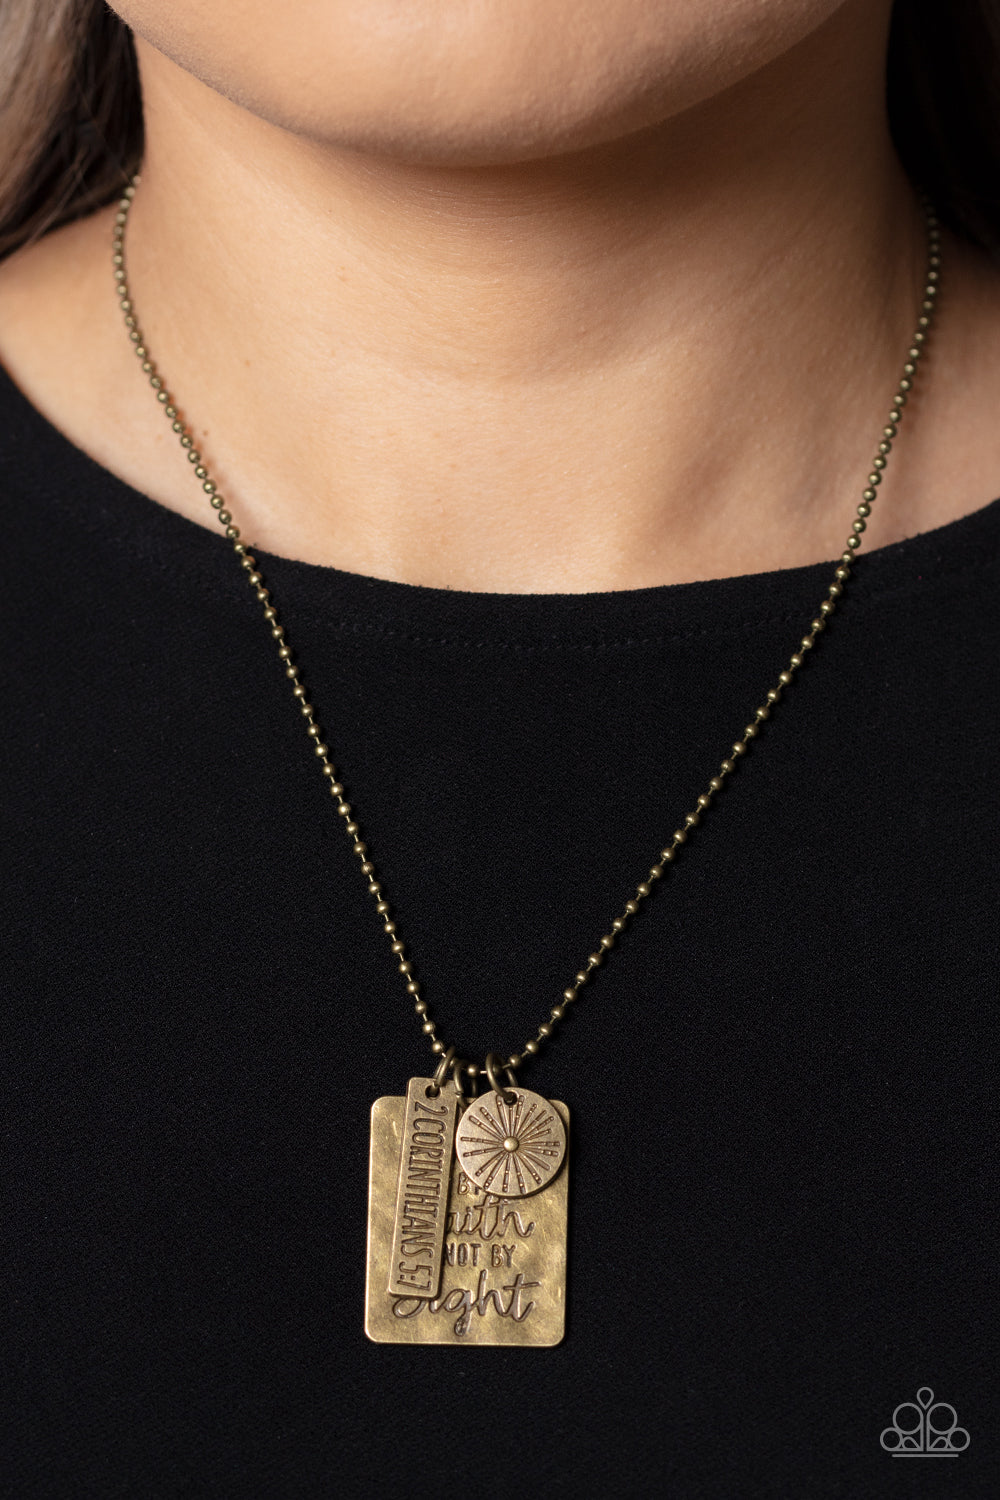 Sunshine Sight - Brass Necklace - Paparazzi Accessories - Hanging from a brass ball chain, a gritty collection of a rectangular plate dangles next to a disc featuring a sun, and a bar stamped with the Bible reference "2 Corinthians 5:7". The three dangling brass shapes add eye-catching movement to the inspired design. Prominently stamped on the rectangular pendant, the words "Walk by Faith not by Sight" stand out for a faith-filled finish. Features an adjustable clasp closure.